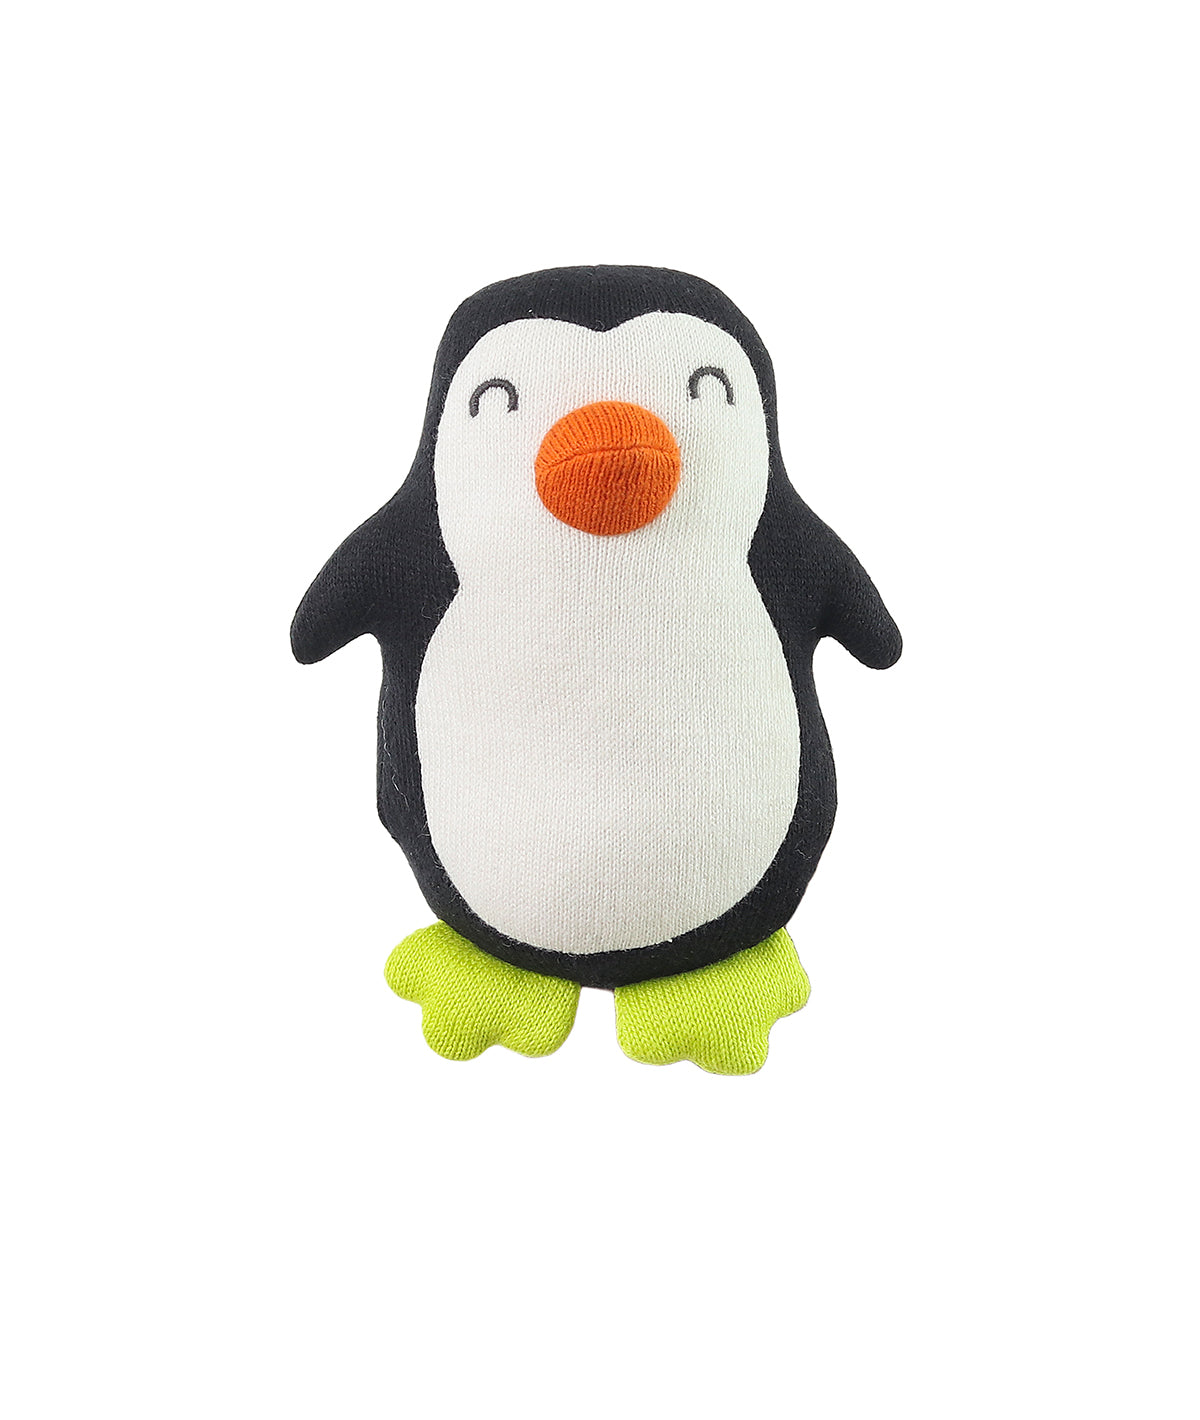 Snowy Penguin Cotton Knitted Stuffed Soft Toy (Black, Ivory & Neon)